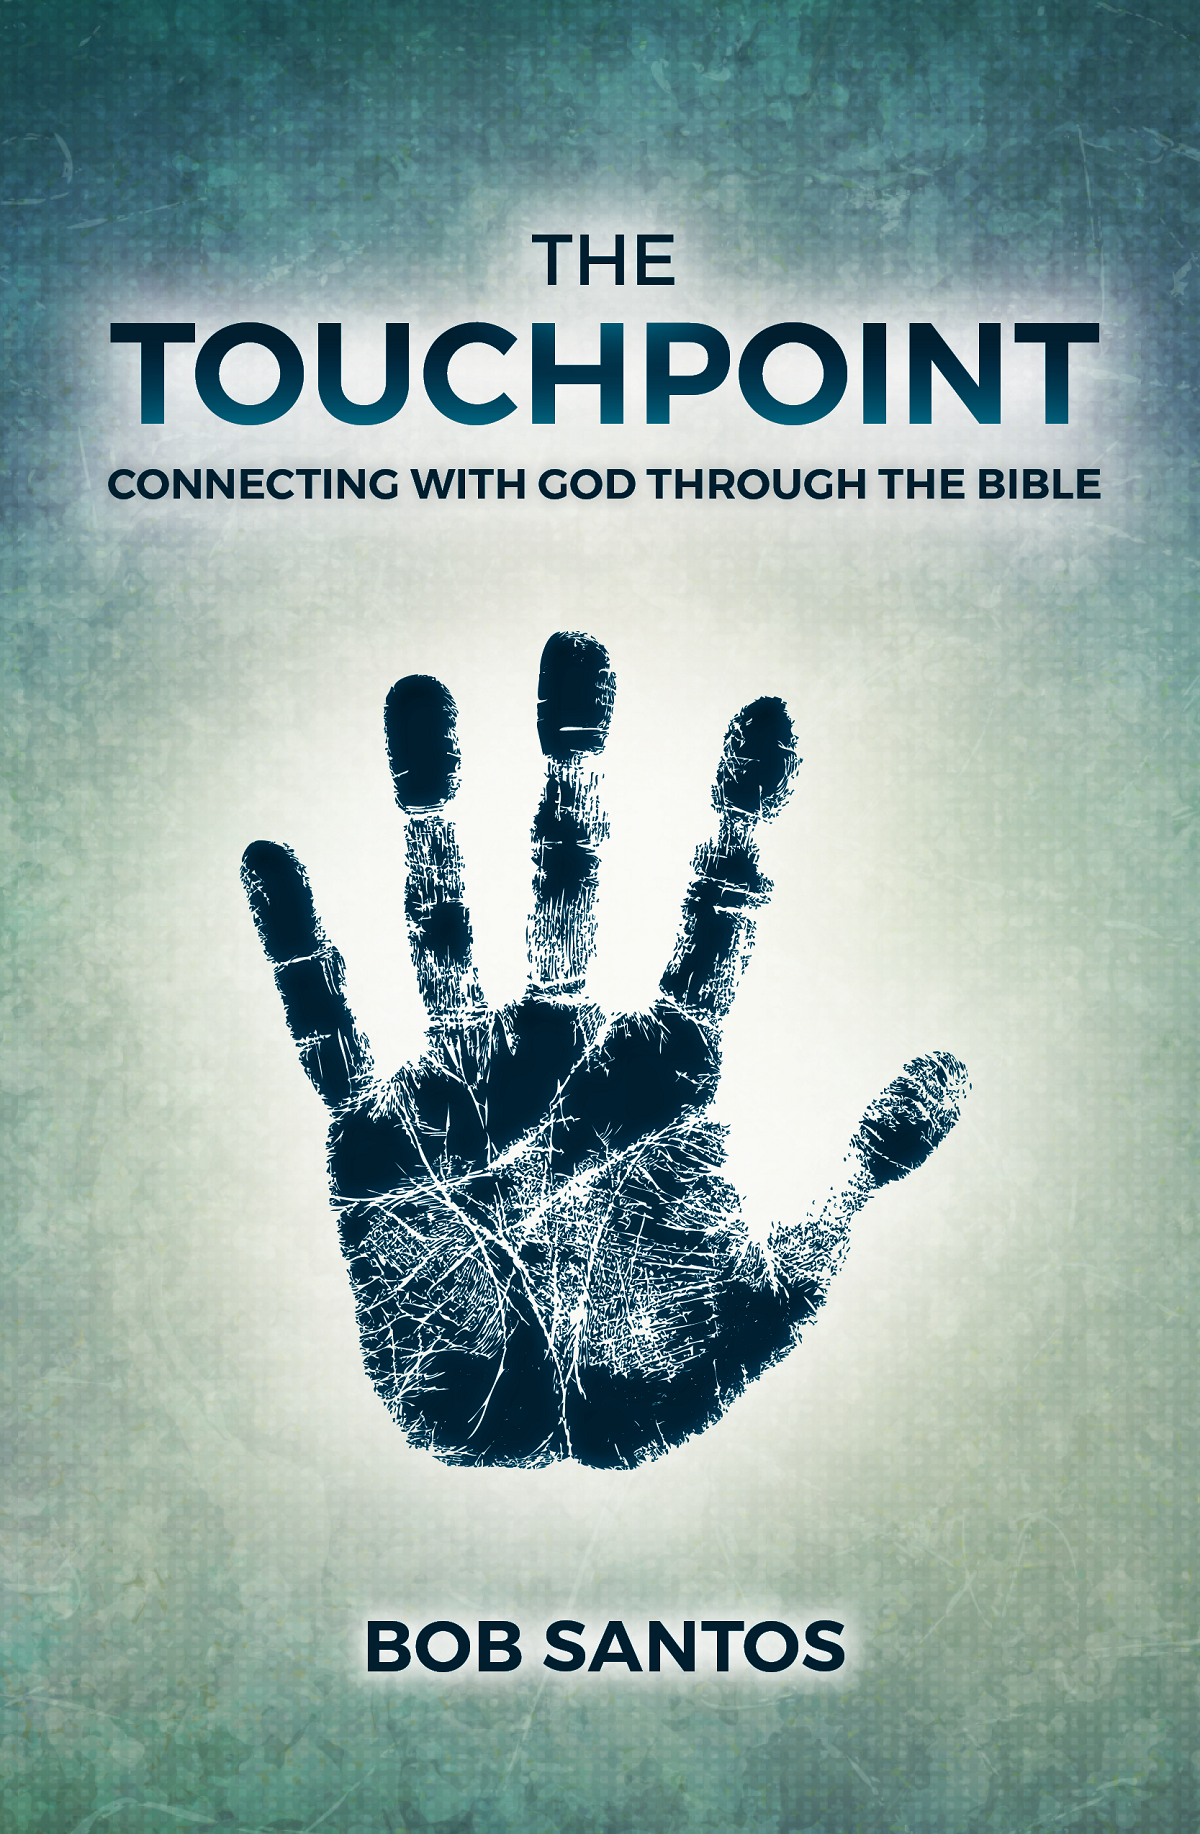 FREE: The TouchPoint by Bob Santos